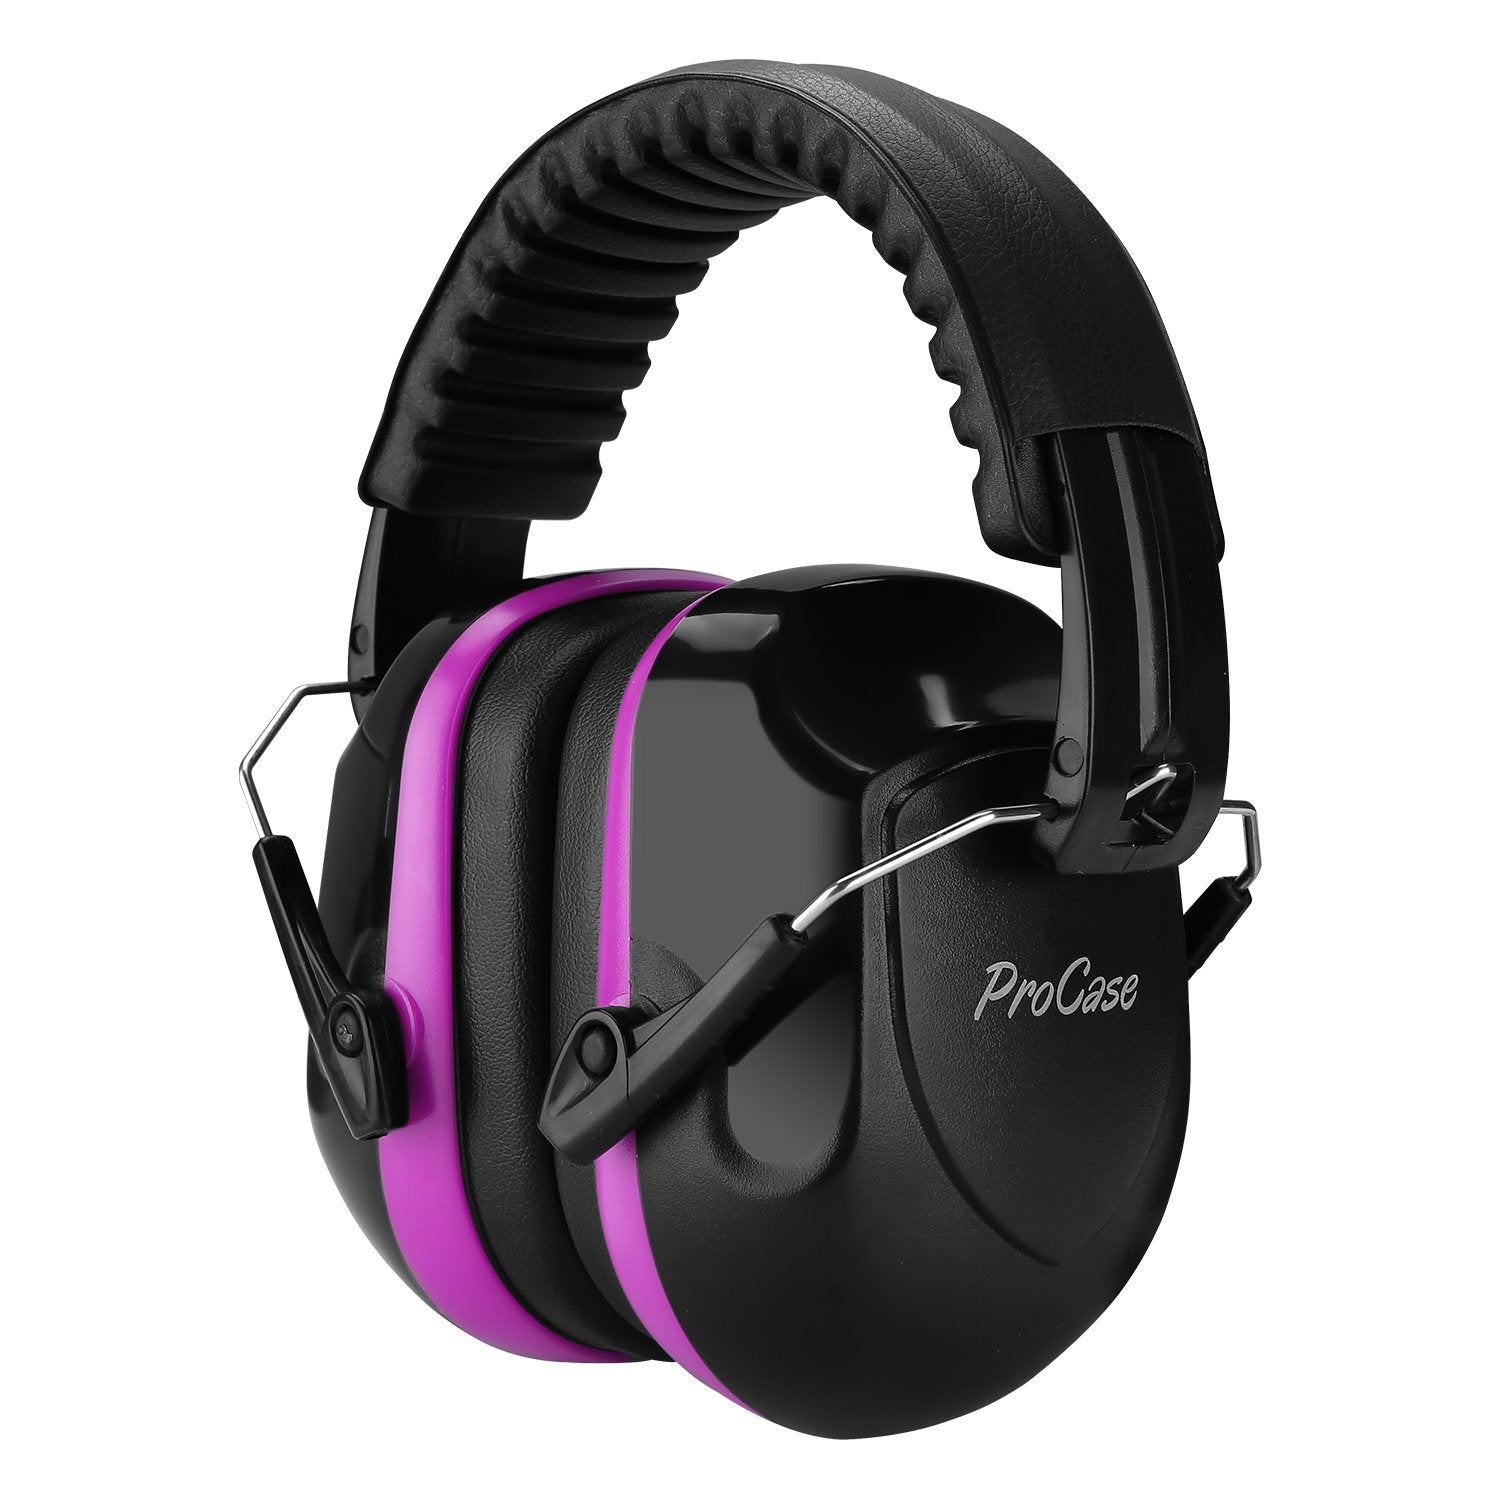 Noise Reduction Cancelling Ear Muffs Hearing Protection | ProCase purple